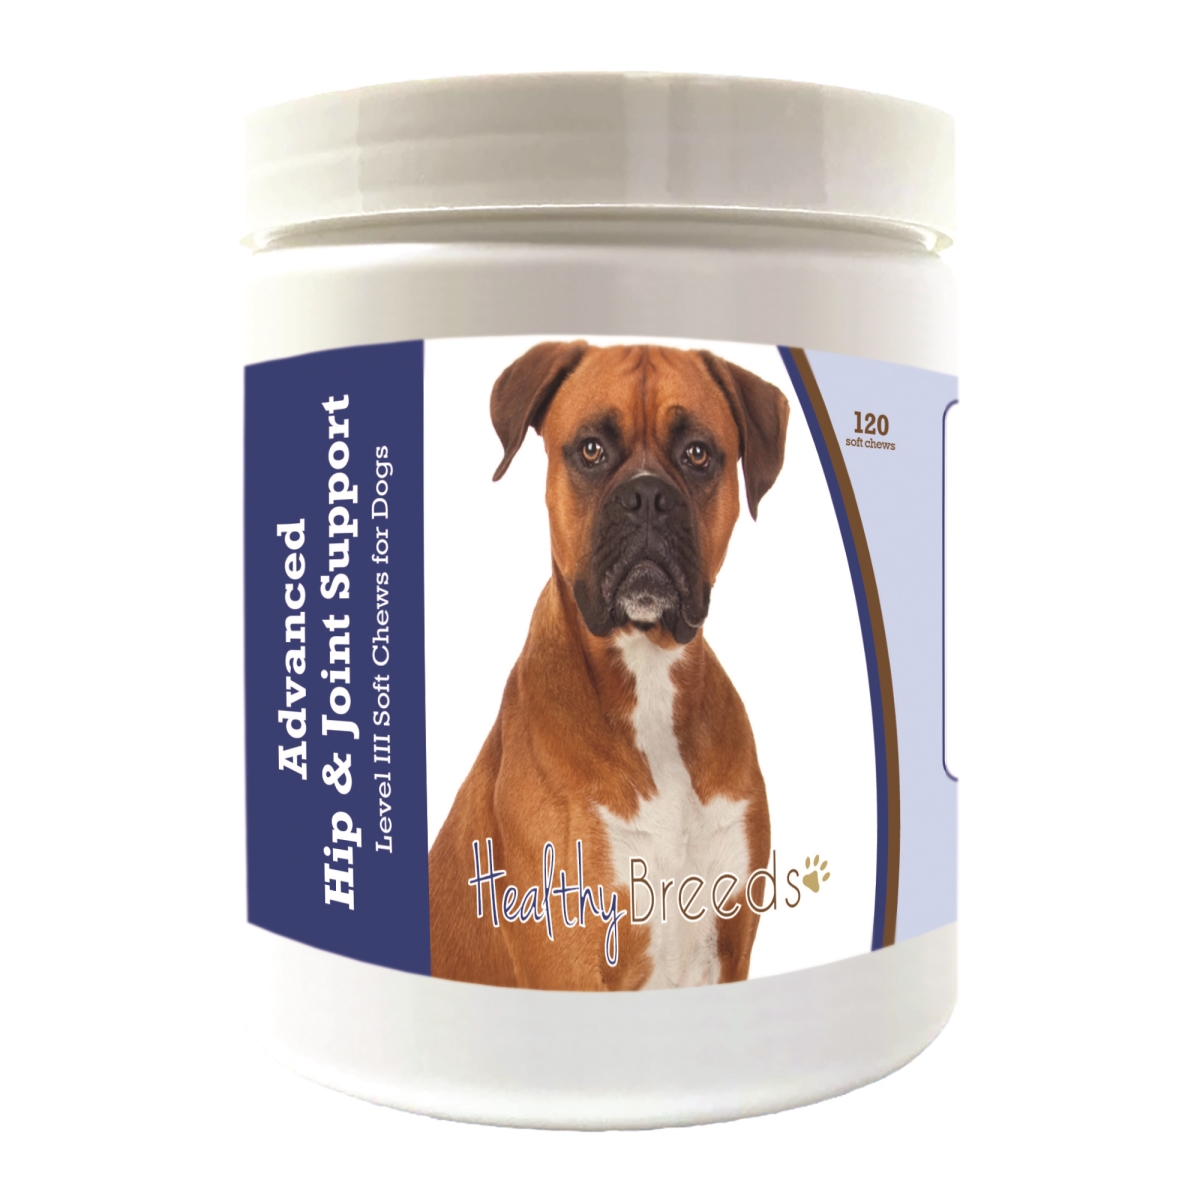 Picture of Healthy Breeds 192959897722 Boxer Advanced Hip & Joint Support Level III Soft Chews for Dogs